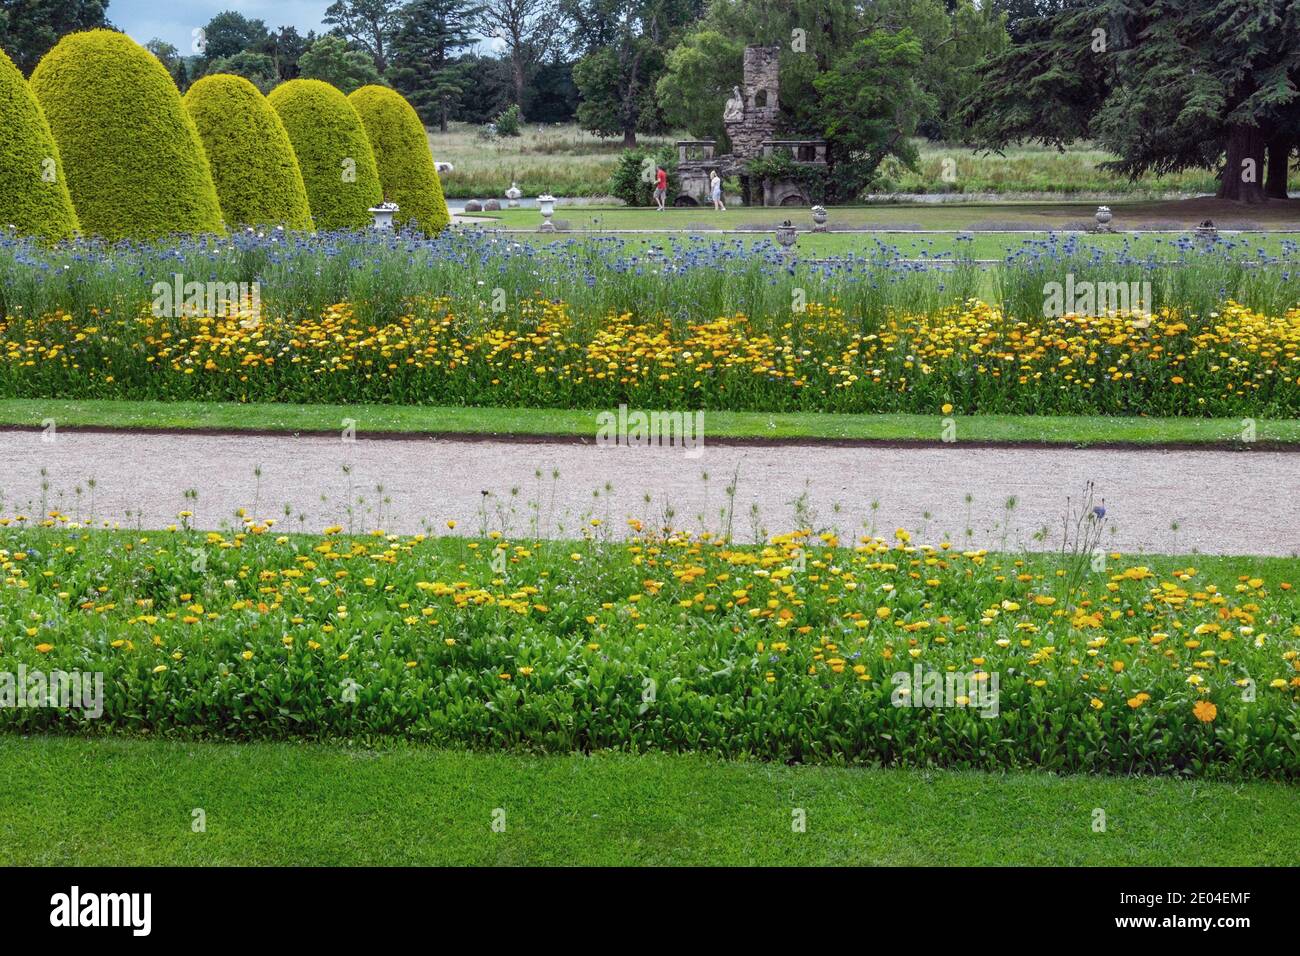 Flower beds and the Ruin, located in the grounds of the Shugborough Estate, near to Stafford, Staffordshire, England, UK Stock Photo